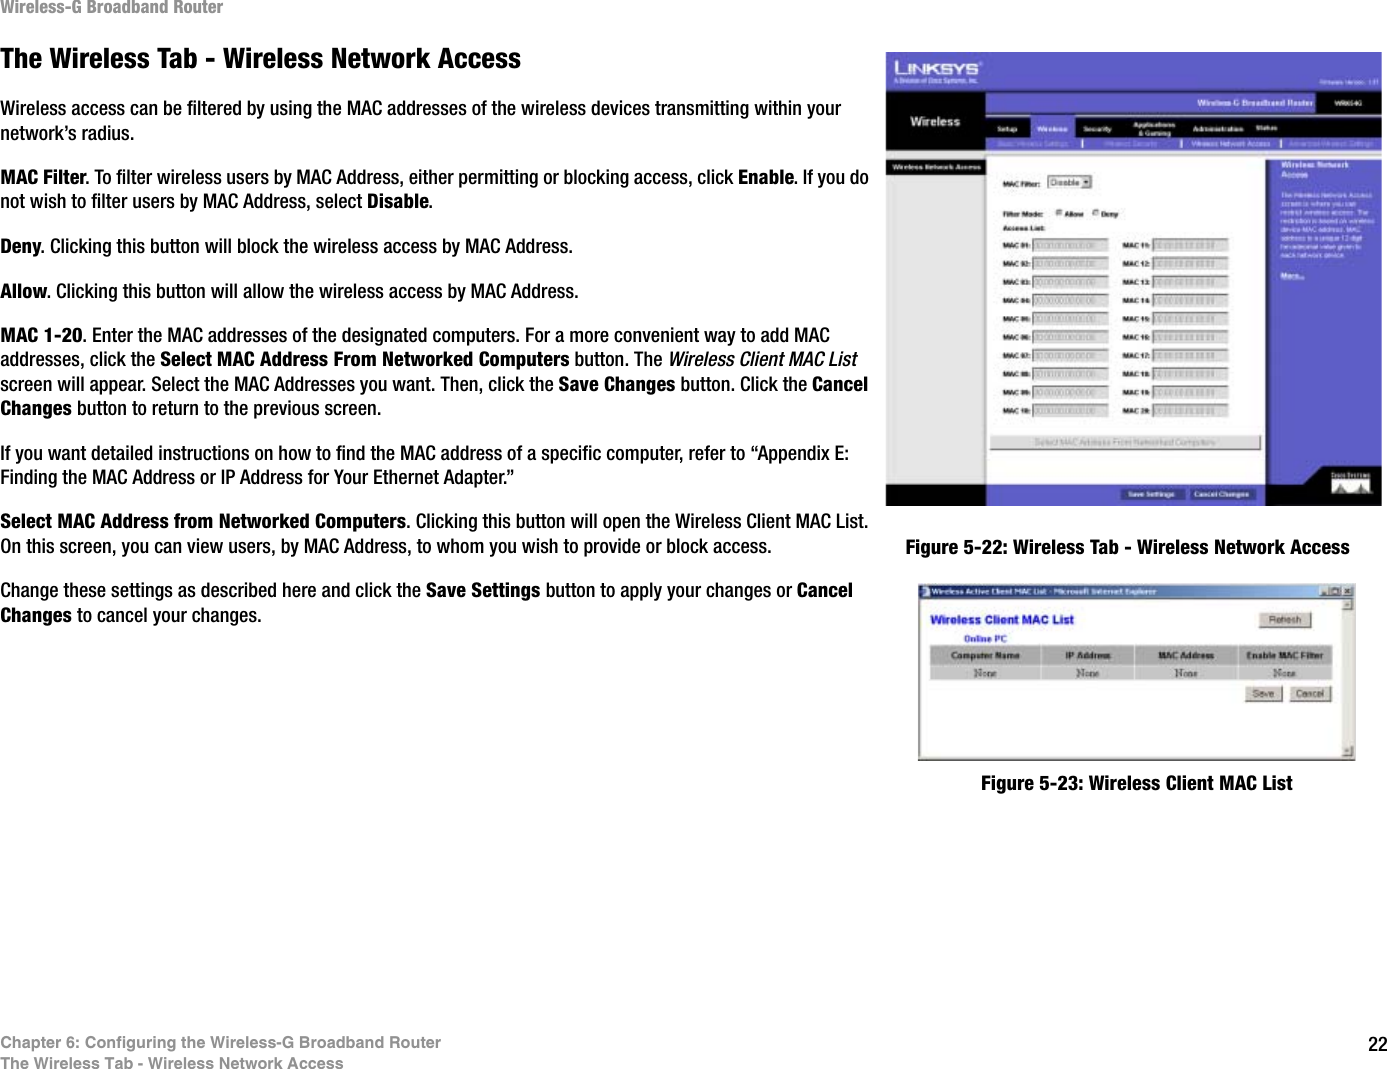 22Chapter 6: Configuring the Wireless-G Broadband RouterThe Wireless Tab - Wireless Network AccessWireless-G Broadband RouterThe Wireless Tab - Wireless Network AccessWireless access can be filtered by using the MAC addresses of the wireless devices transmitting within your network’s radius. MAC Filter. To filter wireless users by MAC Address, either permitting or blocking access, click Enable. If you do not wish to filter users by MAC Address, select Disable.Deny. Clicking this button will block the wireless access by MAC Address.Allow. Clicking this button will allow the wireless access by MAC Address.MAC 1-20. Enter the MAC addresses of the designated computers. For a more convenient way to add MAC addresses, click the Select MAC Address From Networked Computers button. The Wireless Client MAC List screen will appear. Select the MAC Addresses you want. Then, click the Save Changes button. Click the Cancel Changes button to return to the previous screen.If you want detailed instructions on how to find the MAC address of a specific computer, refer to “Appendix E: Finding the MAC Address or IP Address for Your Ethernet Adapter.”Select MAC Address from Networked Computers. Clicking this button will open the Wireless Client MAC List. On this screen, you can view users, by MAC Address, to whom you wish to provide or block access.Change these settings as described here and click the Save Settings button to apply your changes or Cancel Changes to cancel your changes.Figure 5-23: Wireless Client MAC ListFigure 5-22: Wireless Tab - Wireless Network Access